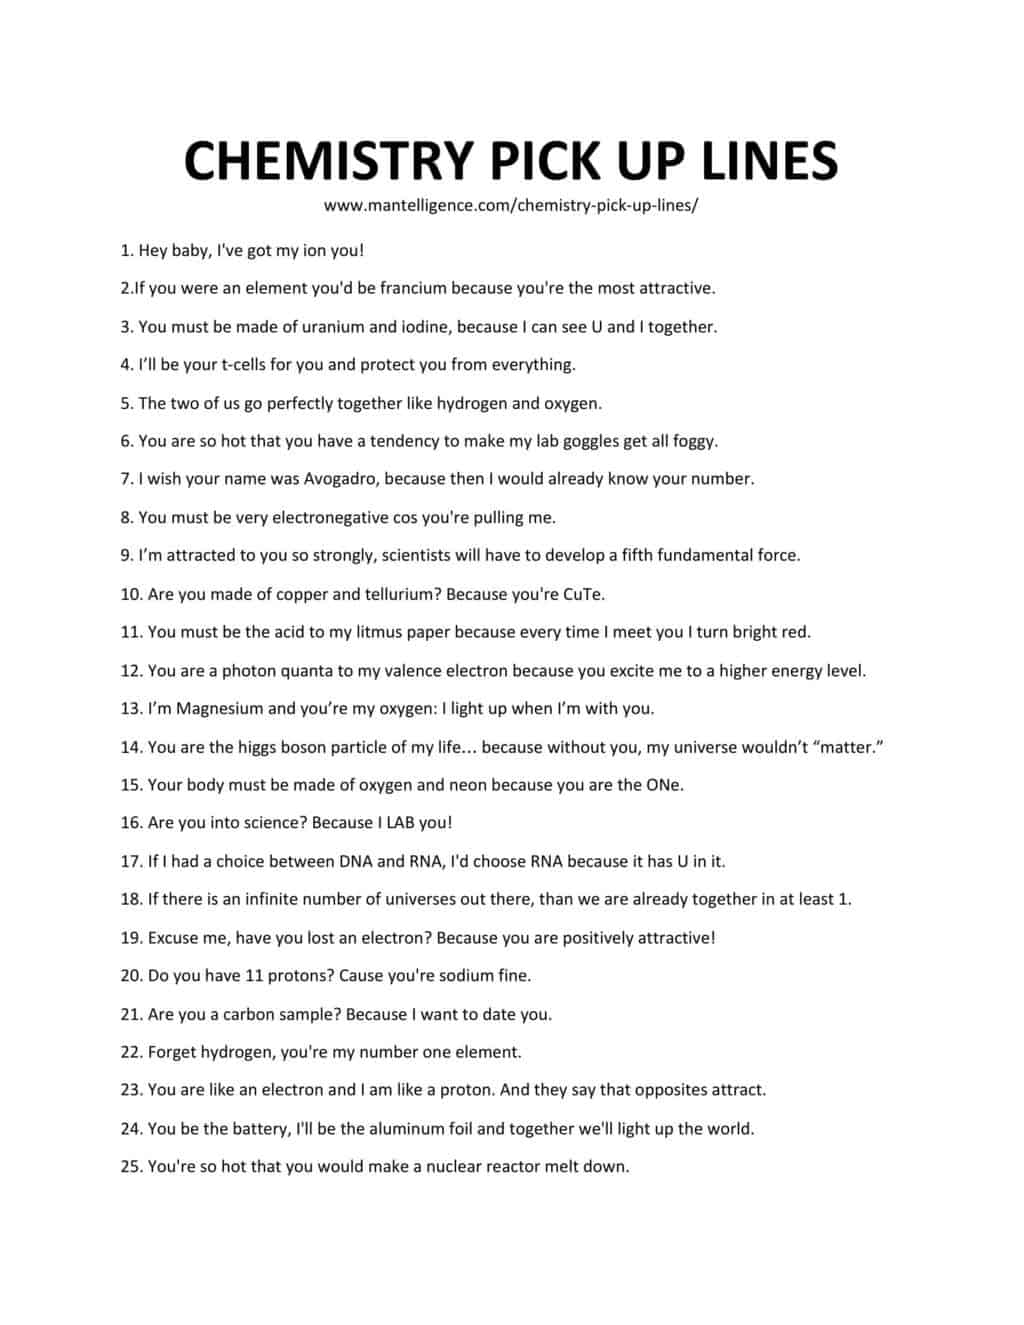 Downloadable and printable jpg/pdf list of chemistry pick up lines